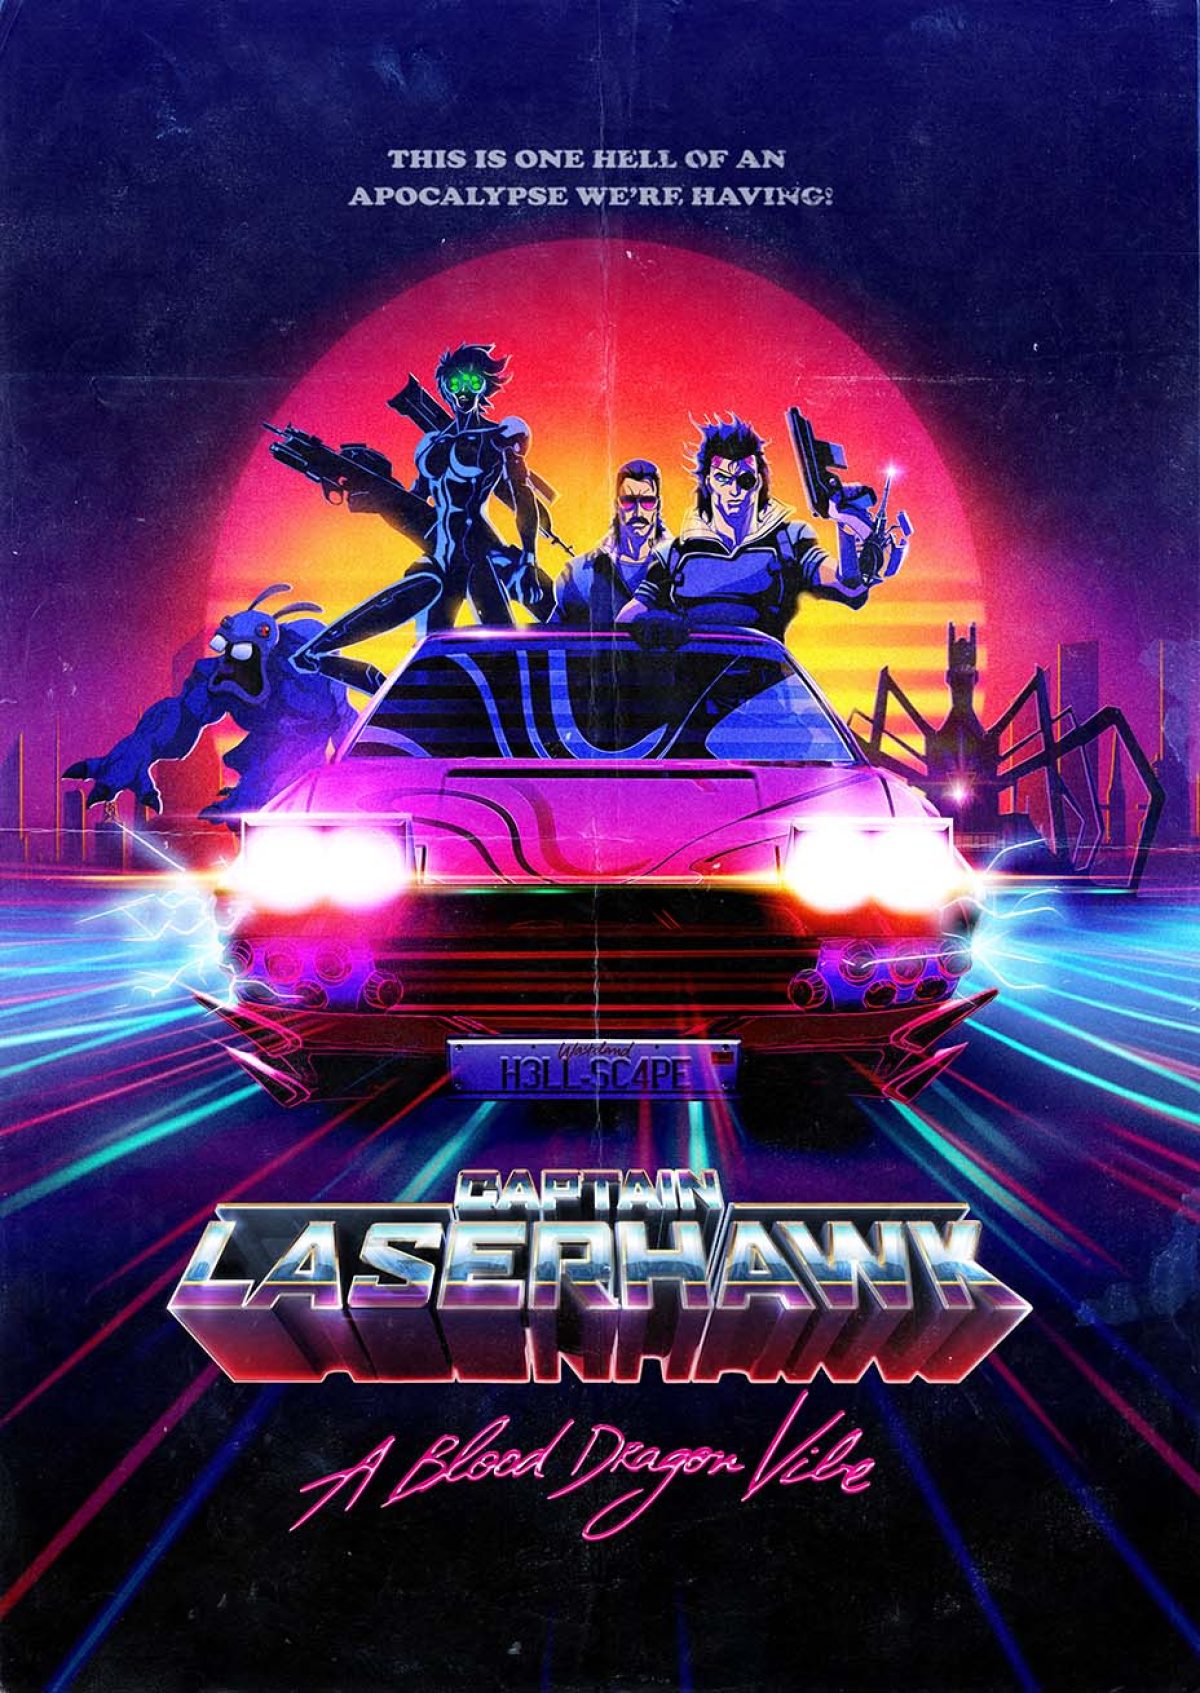 Far Cry 3 Blood Dragon Spinoff Show Coming Castlevania Producer Attached